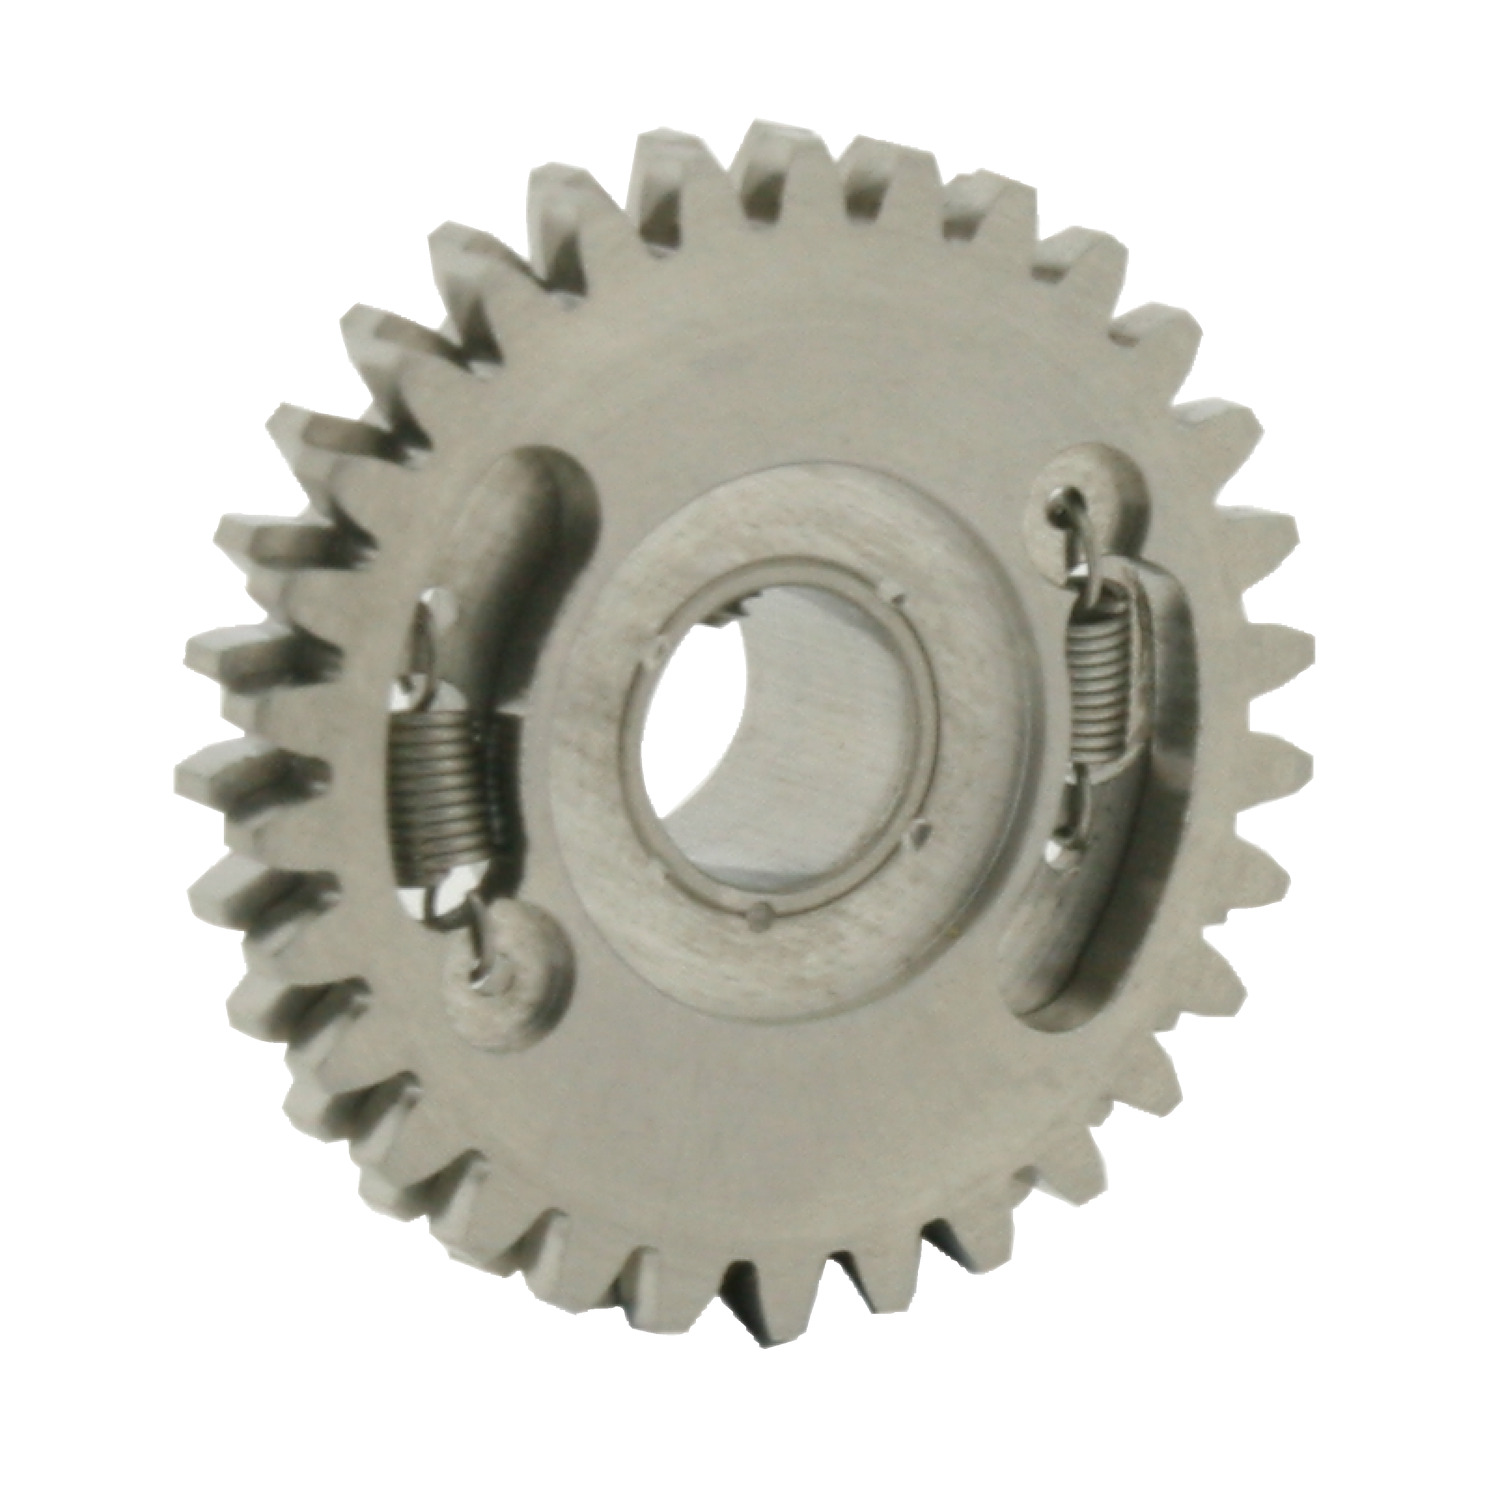 R2086 - Hubless Spur Gears